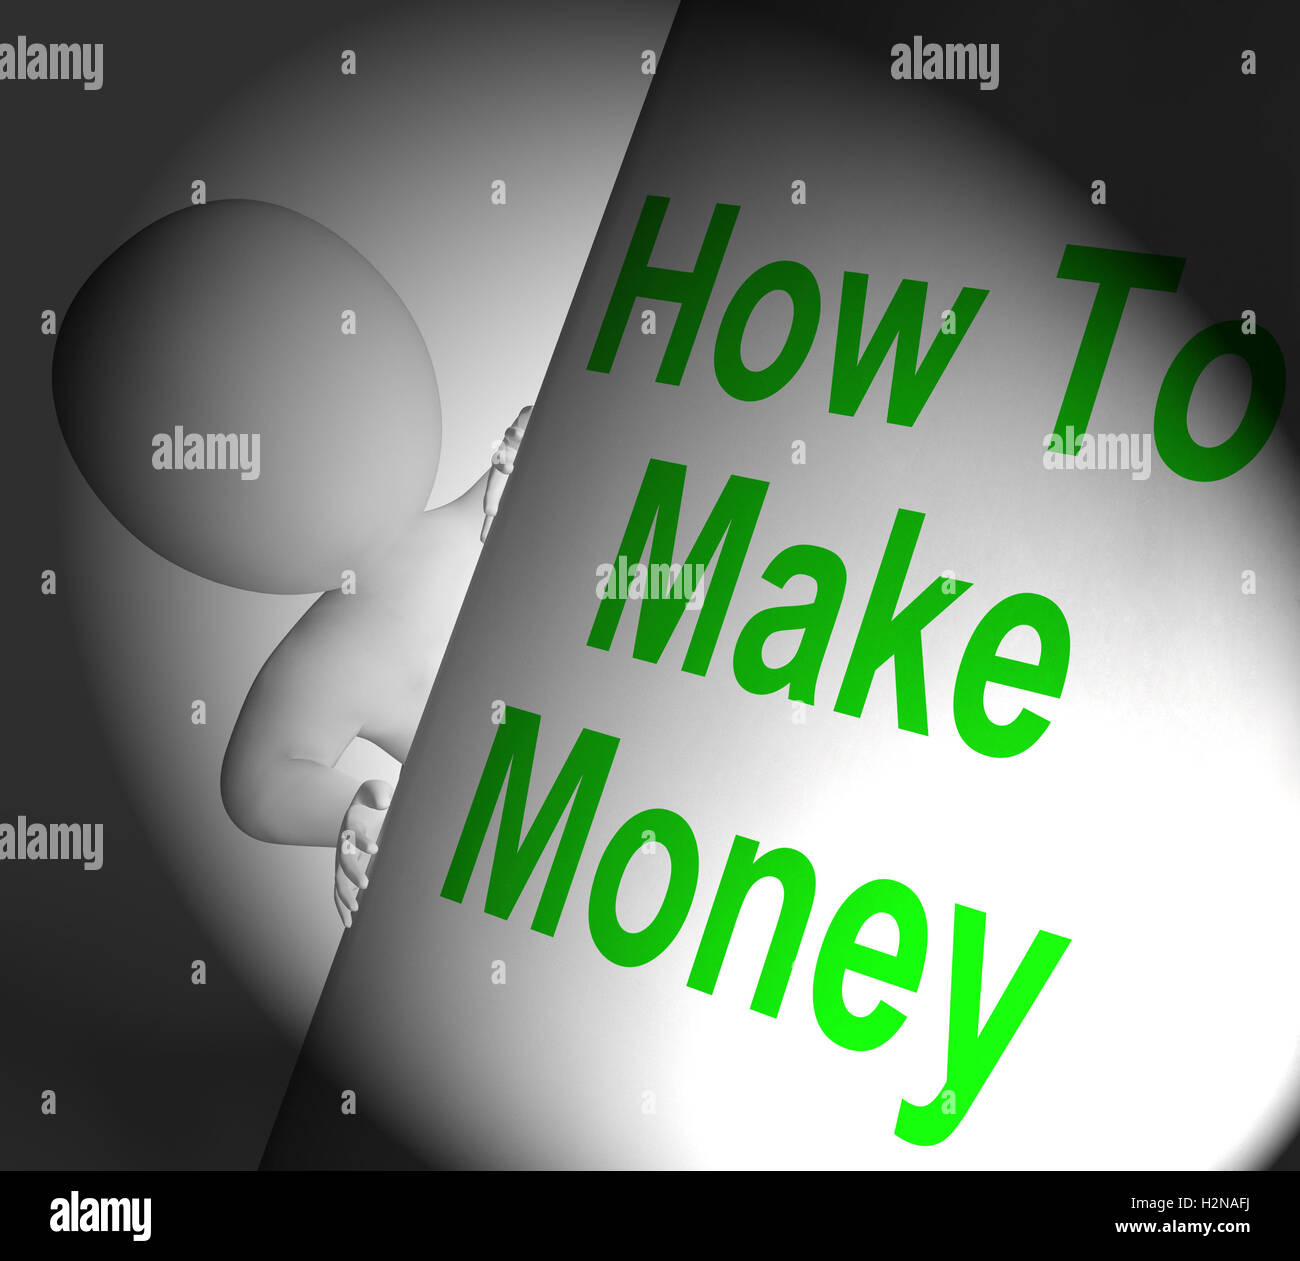 How To Make Money Sign Displaying Riches And Wealth Stock Photo